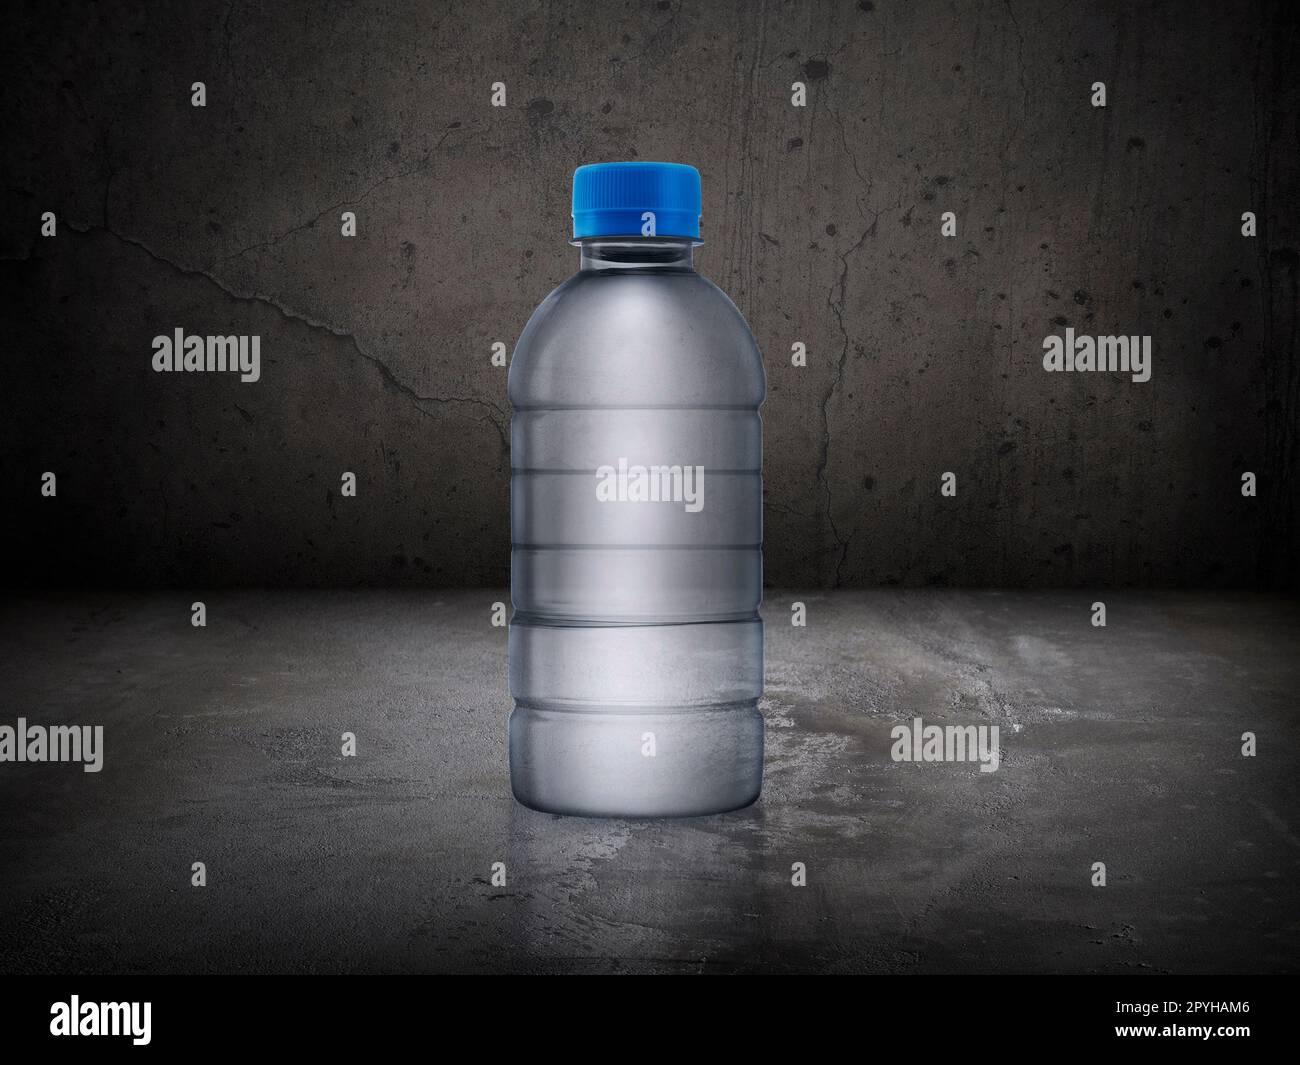 Small water bottle on old room Cement floor Stock Photo